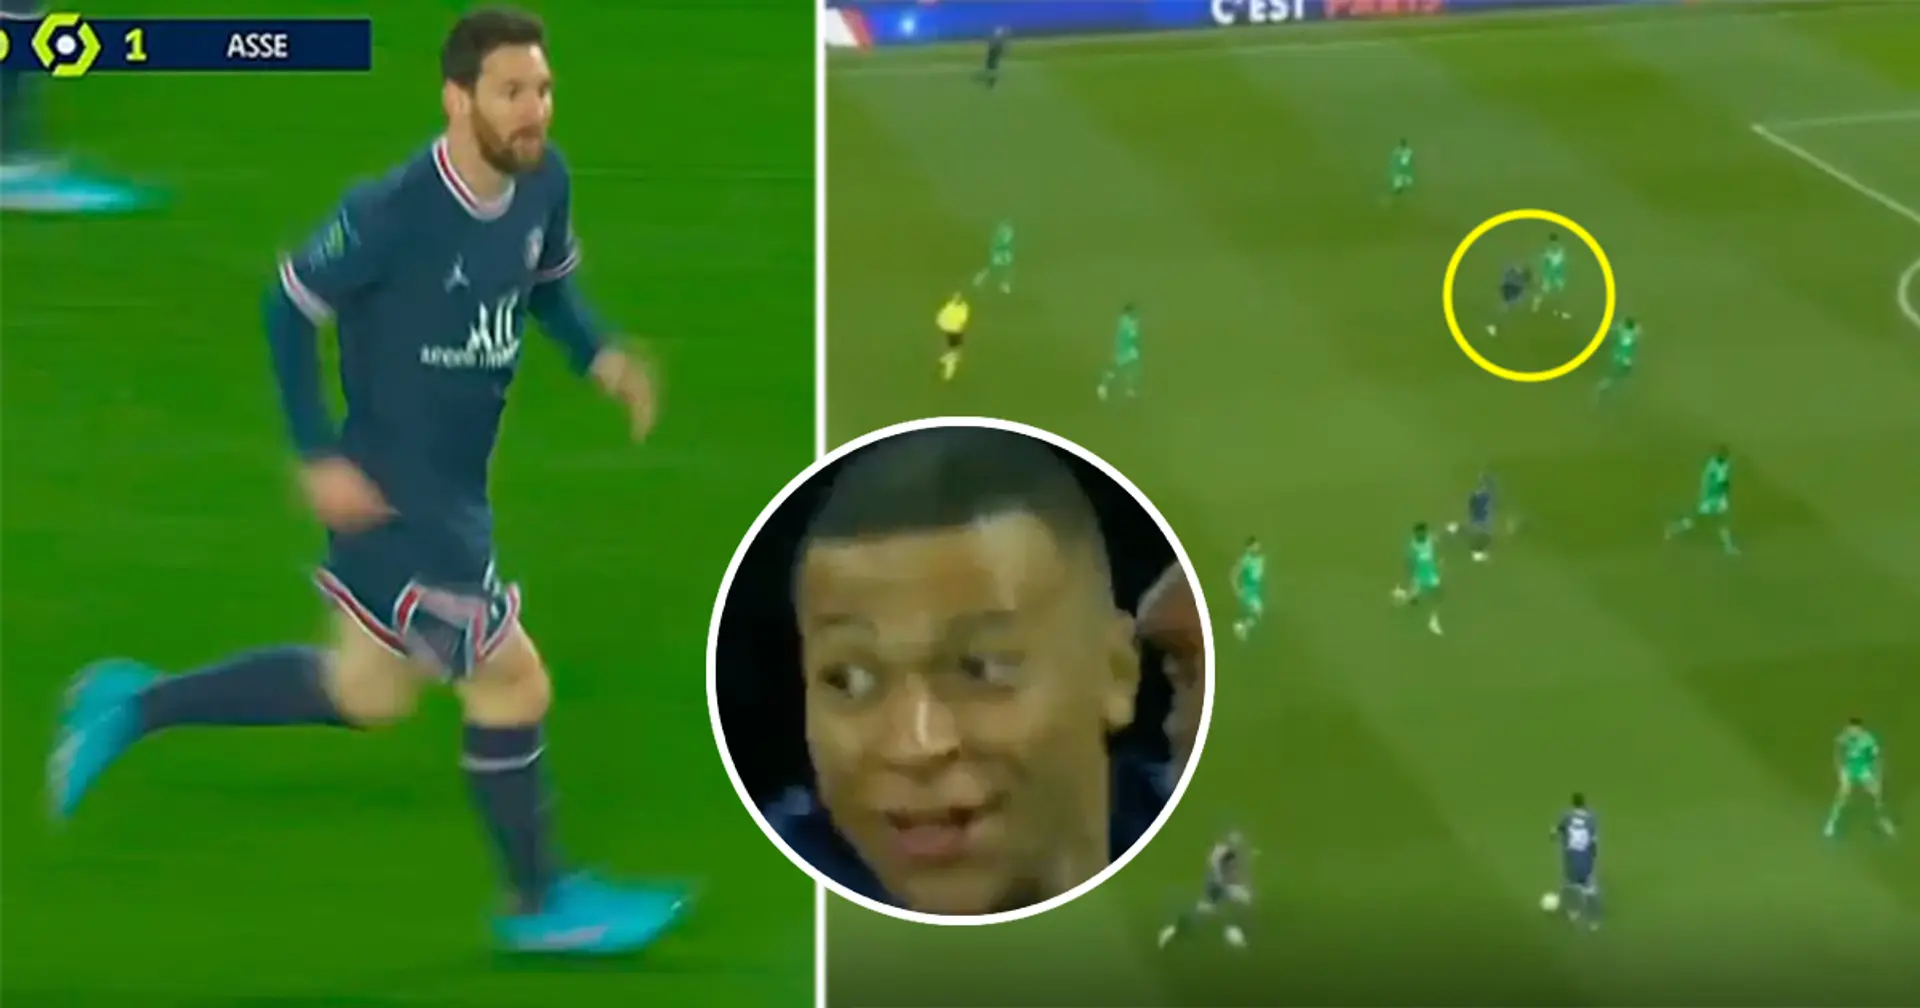 Messi records 2 unreal assists for PSG, both for Mbappe